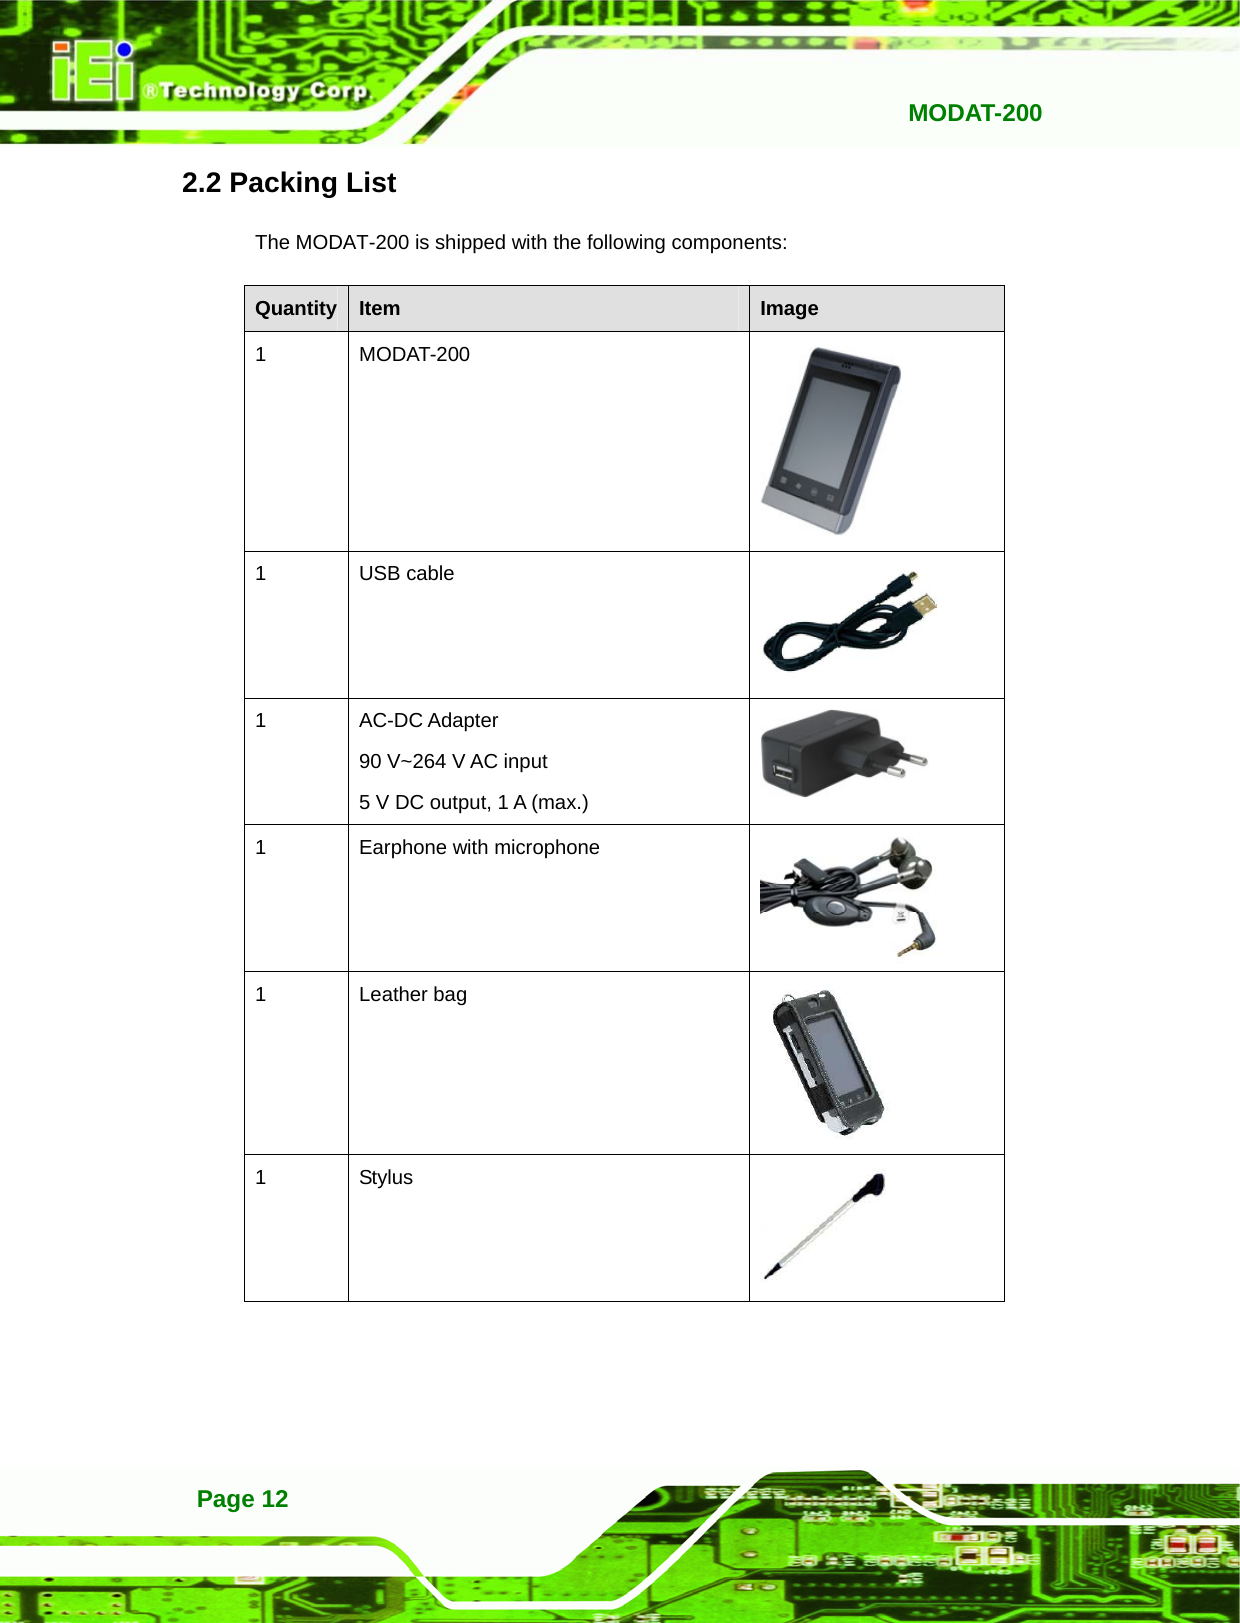   MODAT-200Page 12 2.2 Packing List The MODAT-200 is shipped with the following components: Quantity  Item  Image 1 MODAT-200  1 USB cable   1 AC-DC Adapter 90 V~264 V AC input 5 V DC output, 1 A (max.)   1  Earphone with microphone  1 Leather bag  1 Stylus  